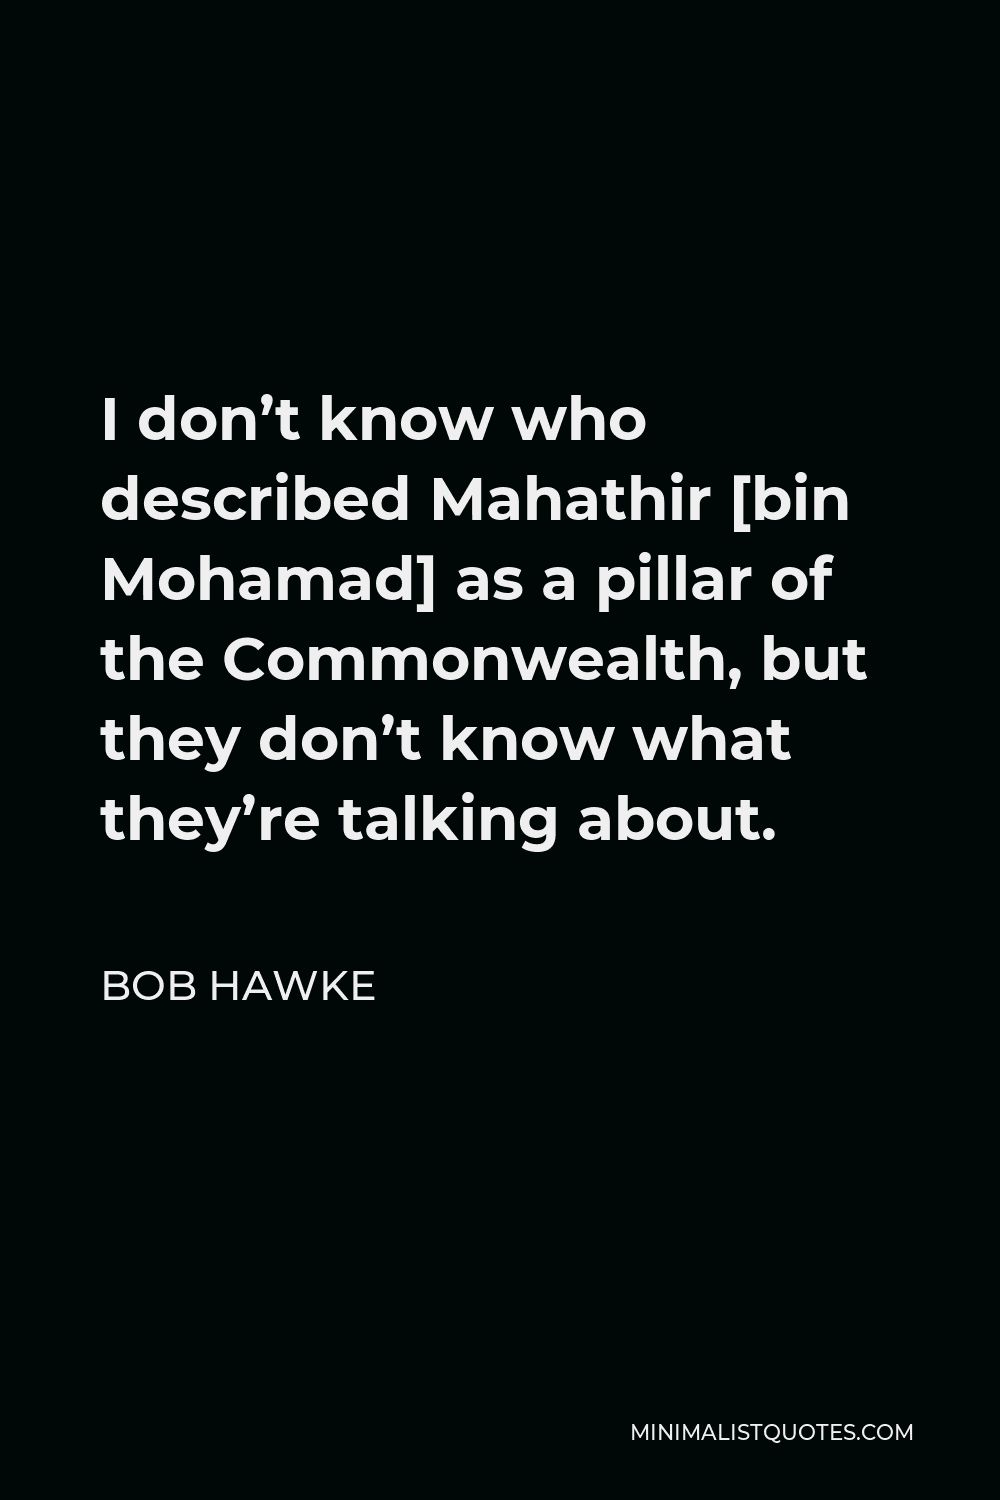 Bob Hawke Quote - I don’t know who described Mahathir [bin Mohamad] as a pillar of the Commonwealth, but they don’t know what they’re talking about.